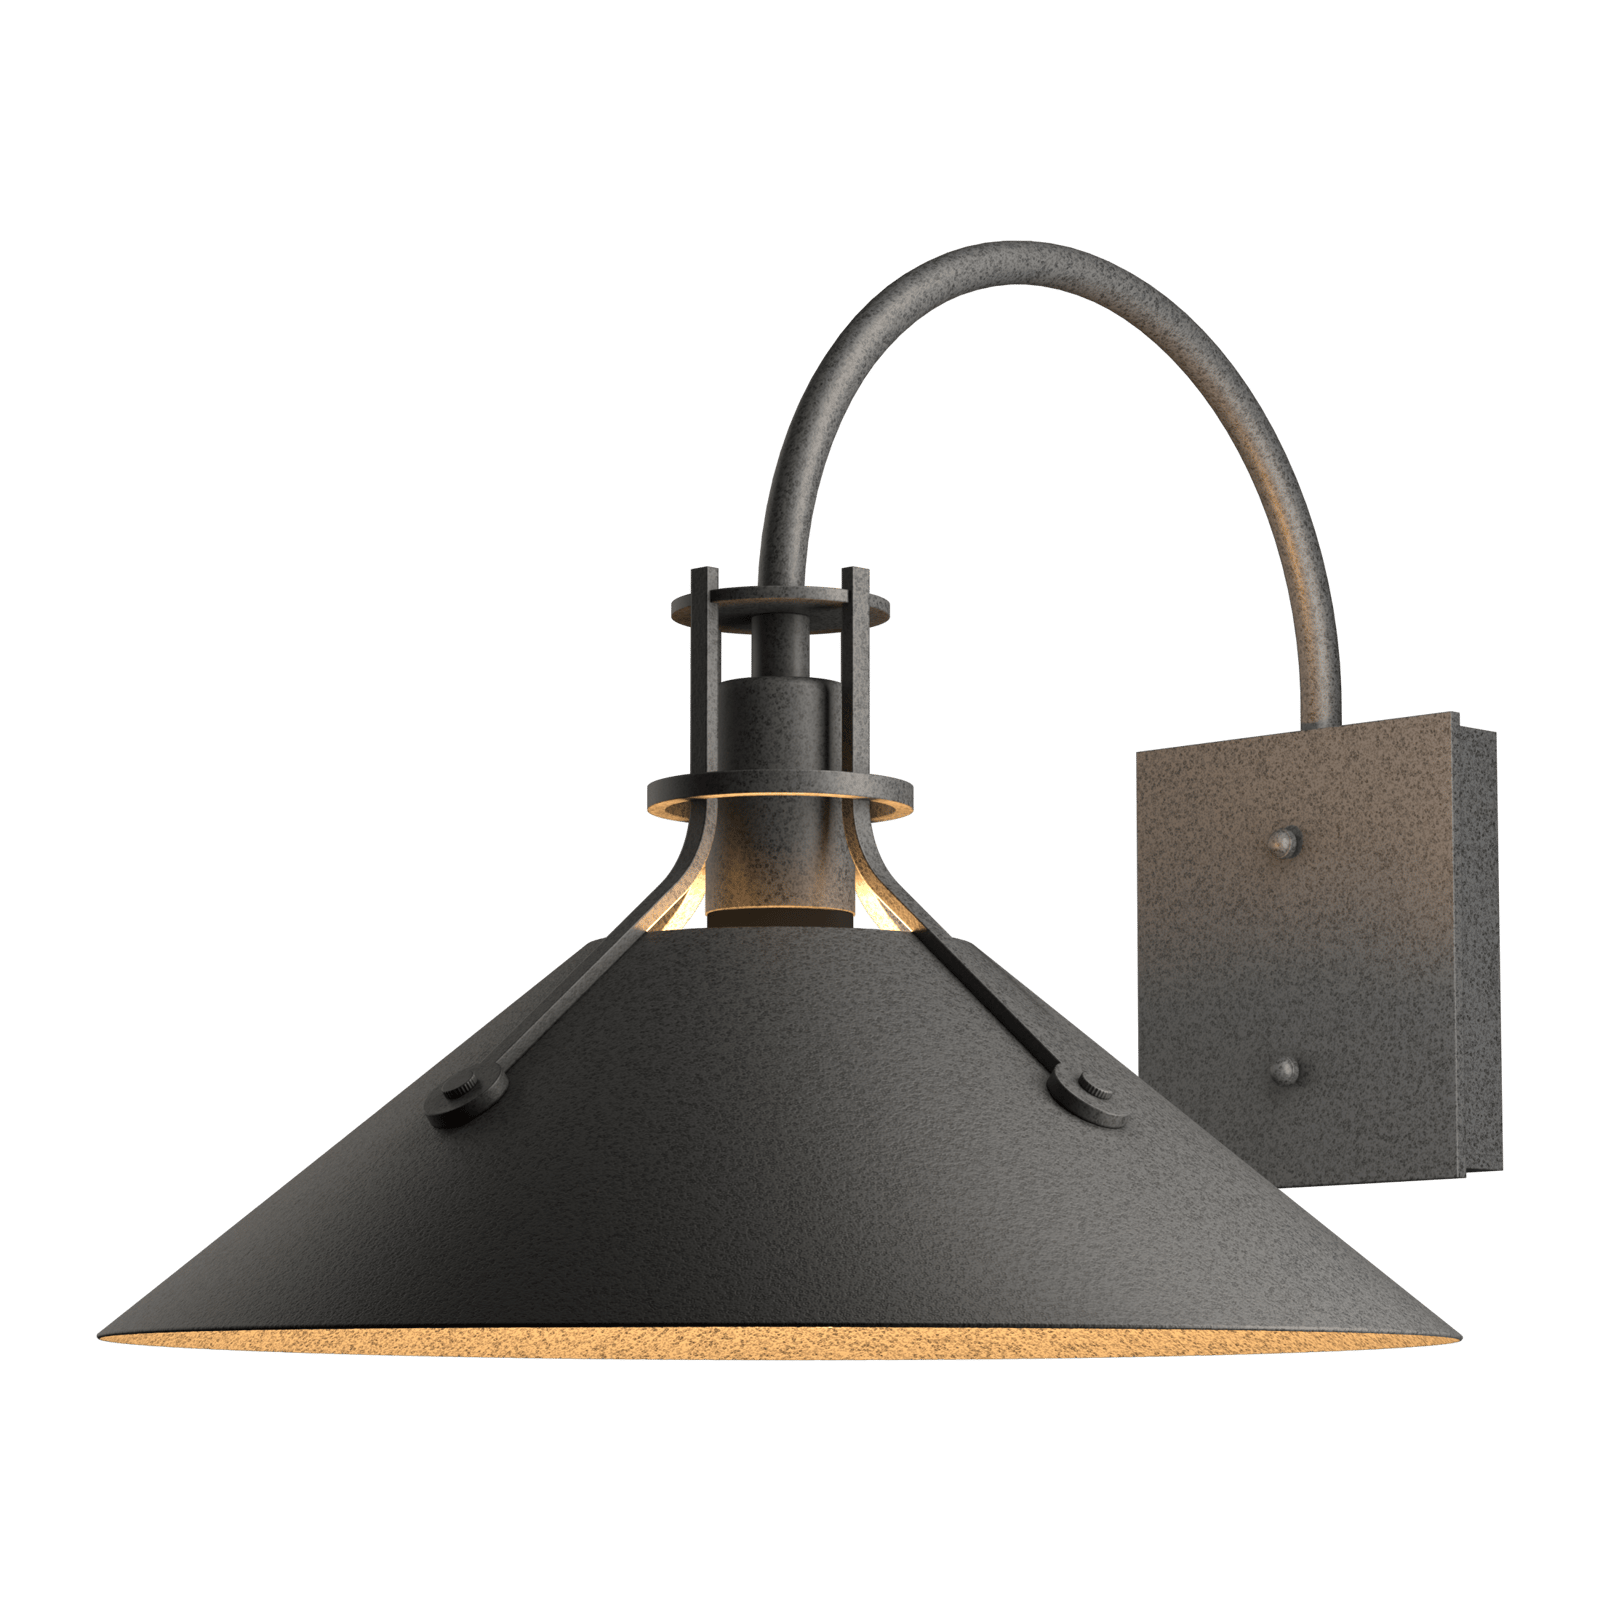 Hubbardton Forge Henry Large Outdoor Sconce